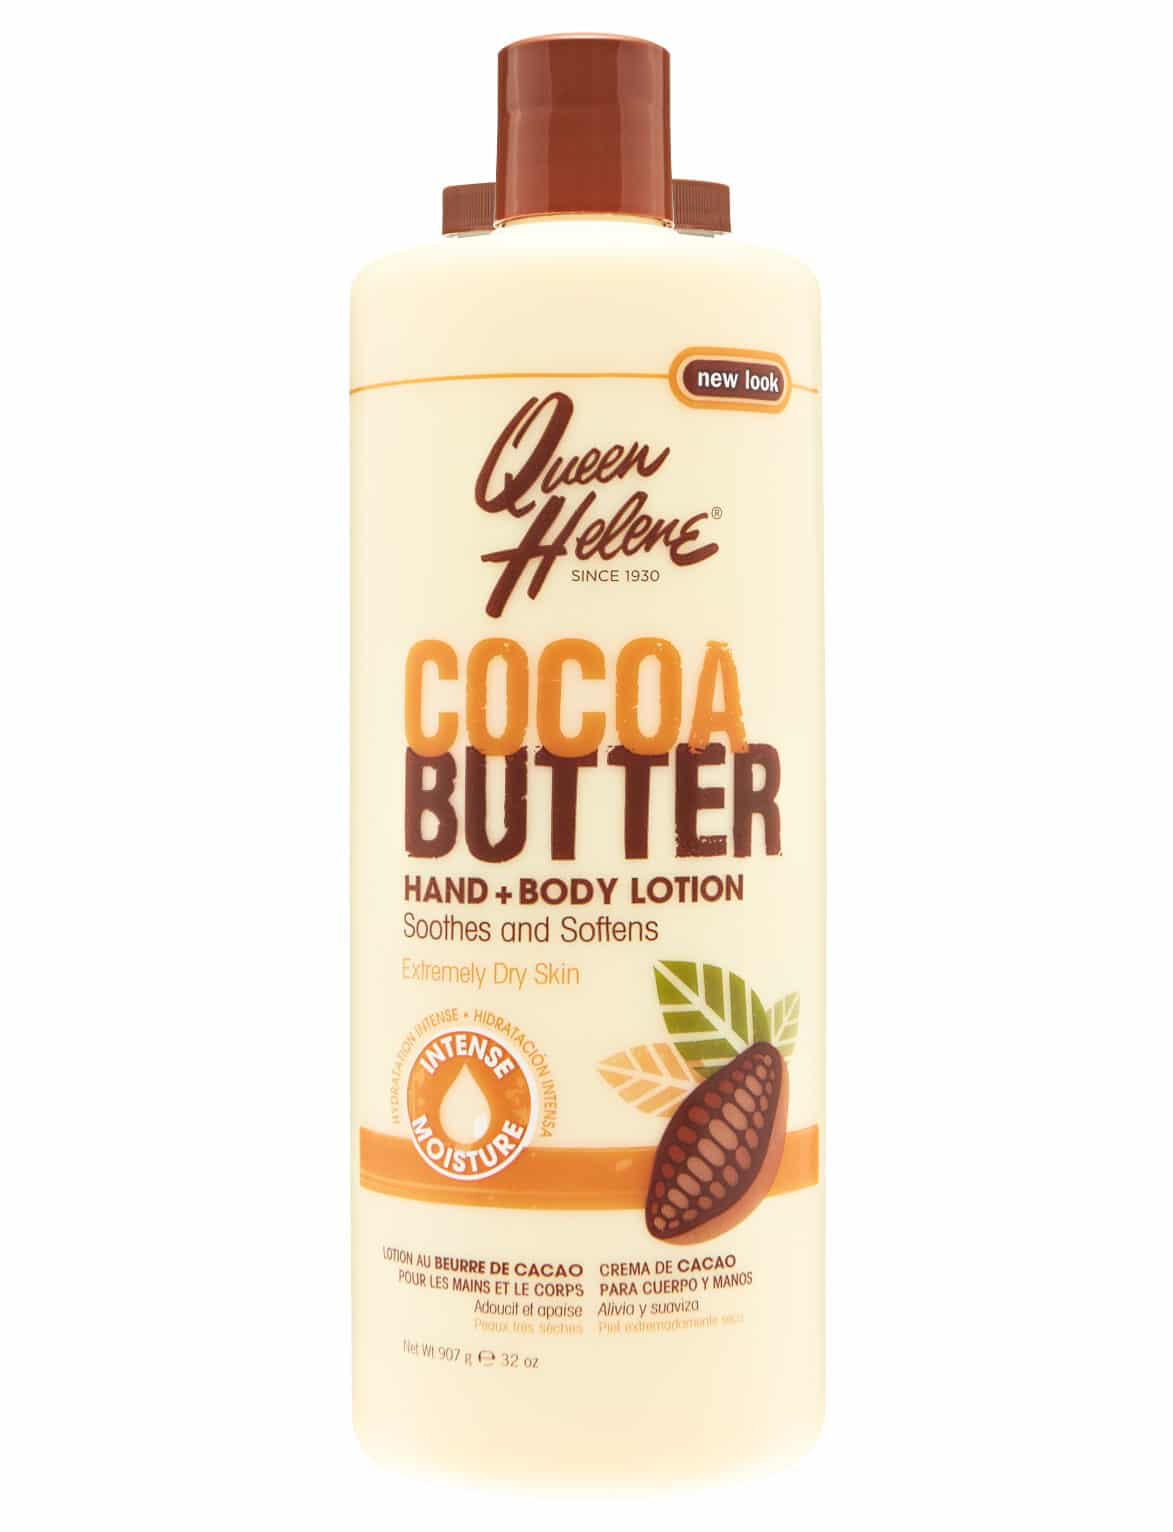 Queen Helene Cocoa Butter Lotion 32oz - Barber supplies